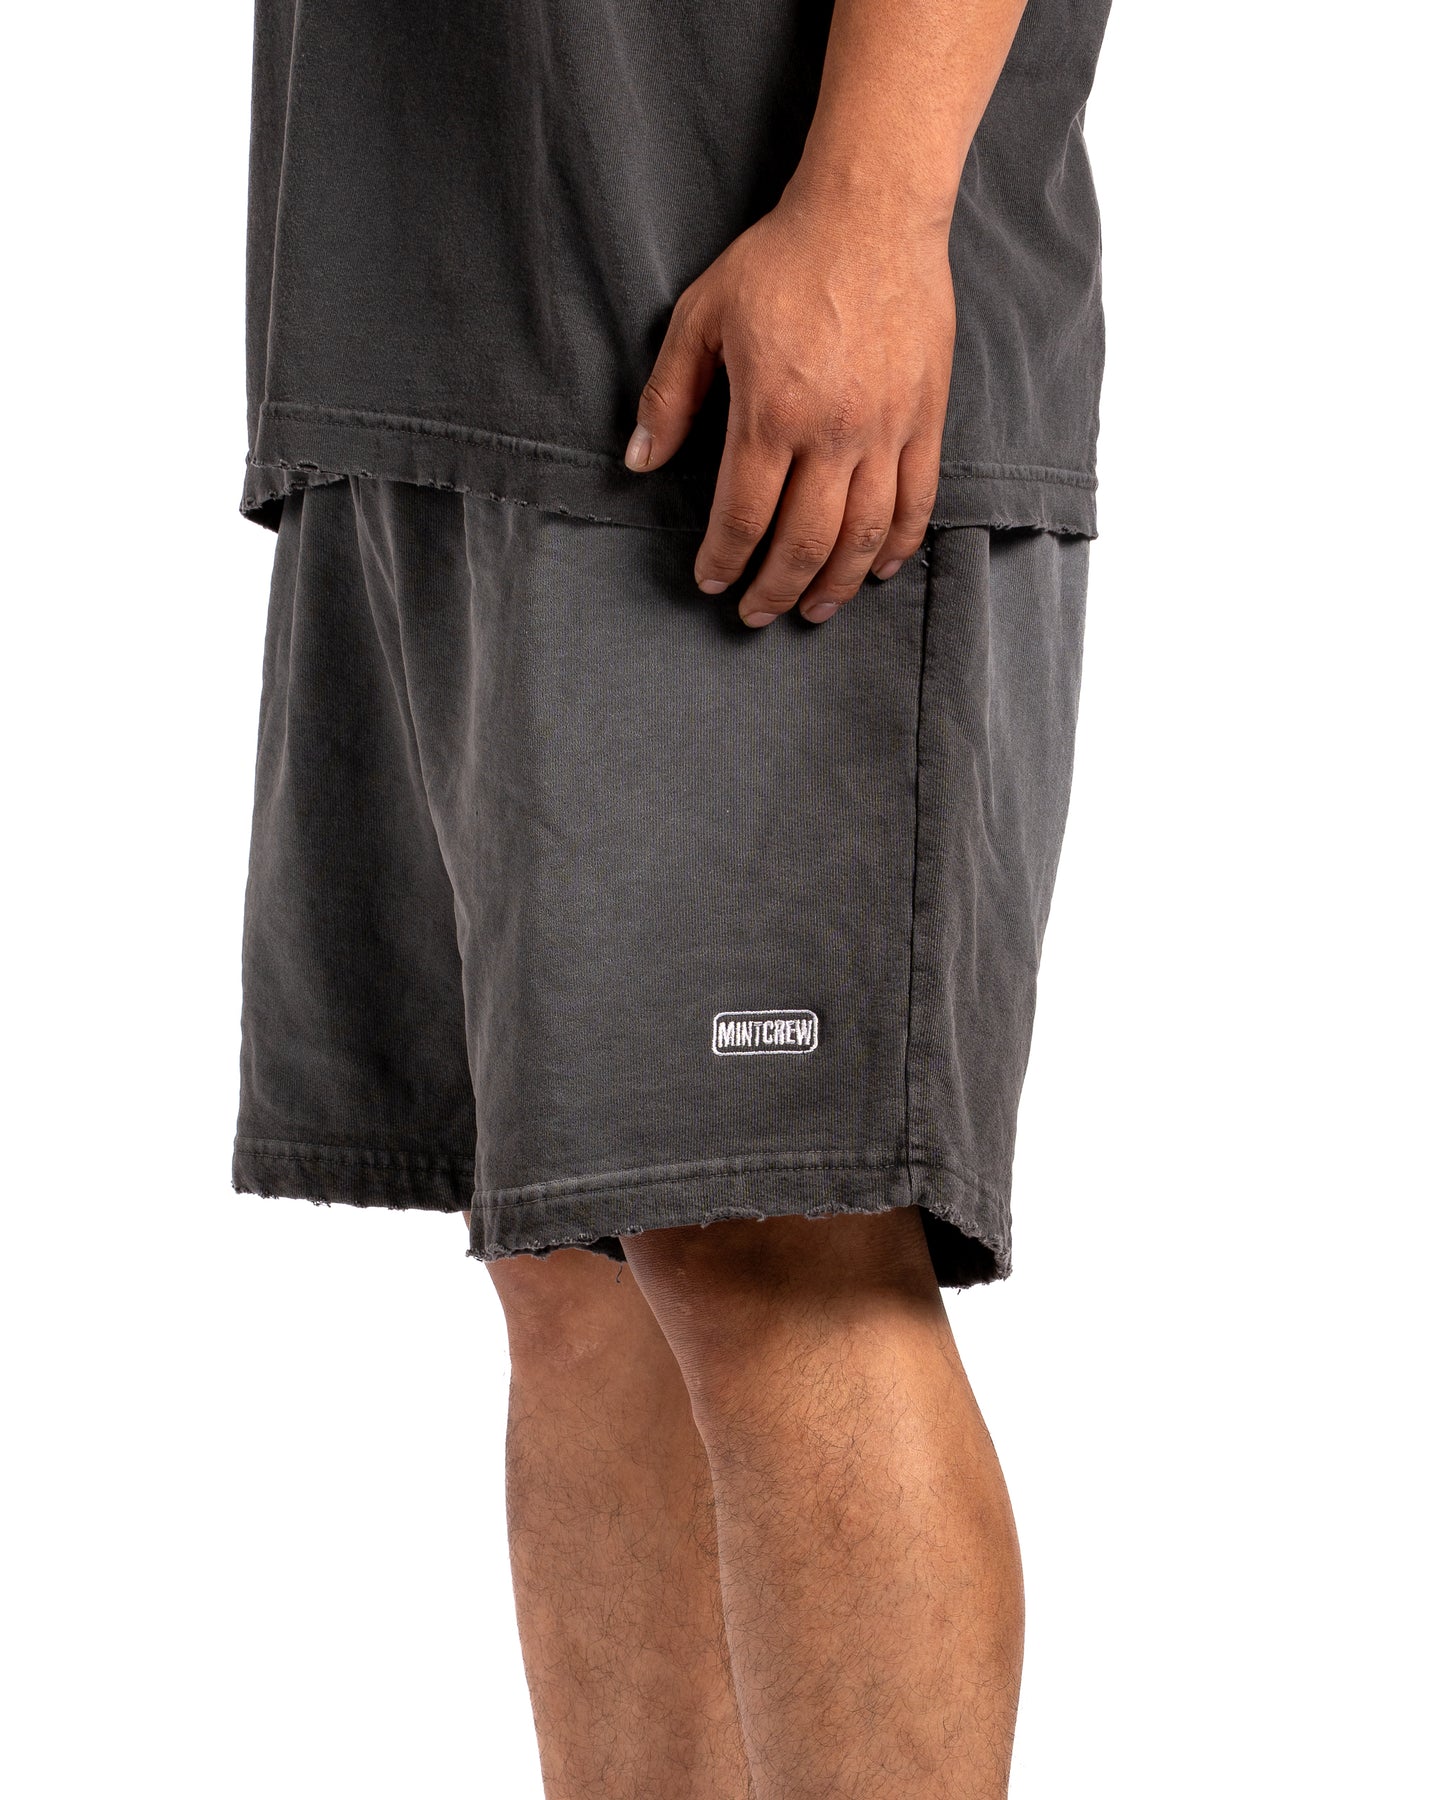 SUN FADED STAMPED LOGO SHORTS (SHADOW)